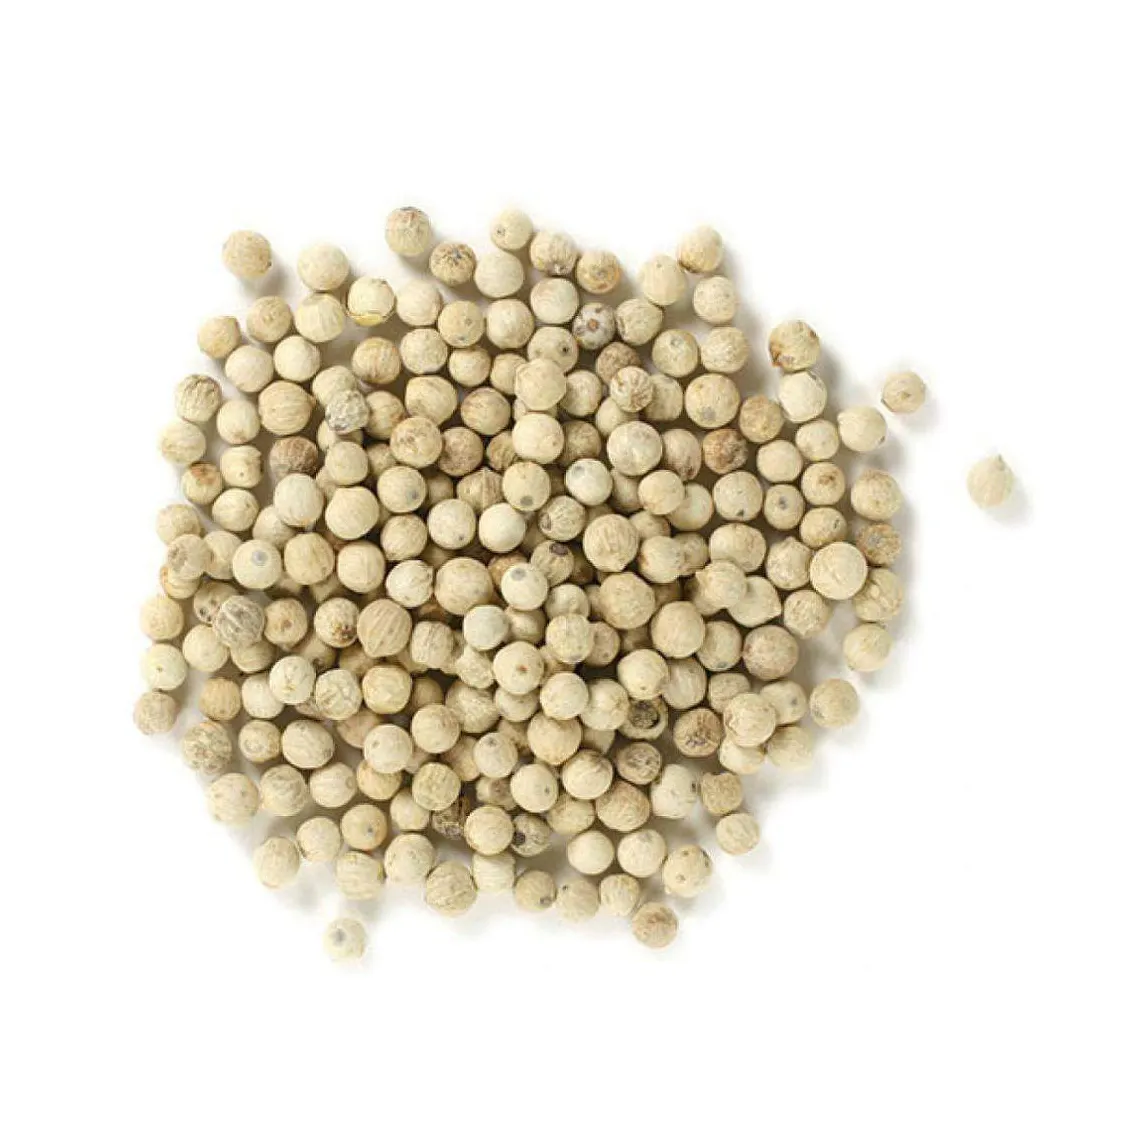 Premium Quality Whole White Dried Peppercorns for Wholesale Buyers